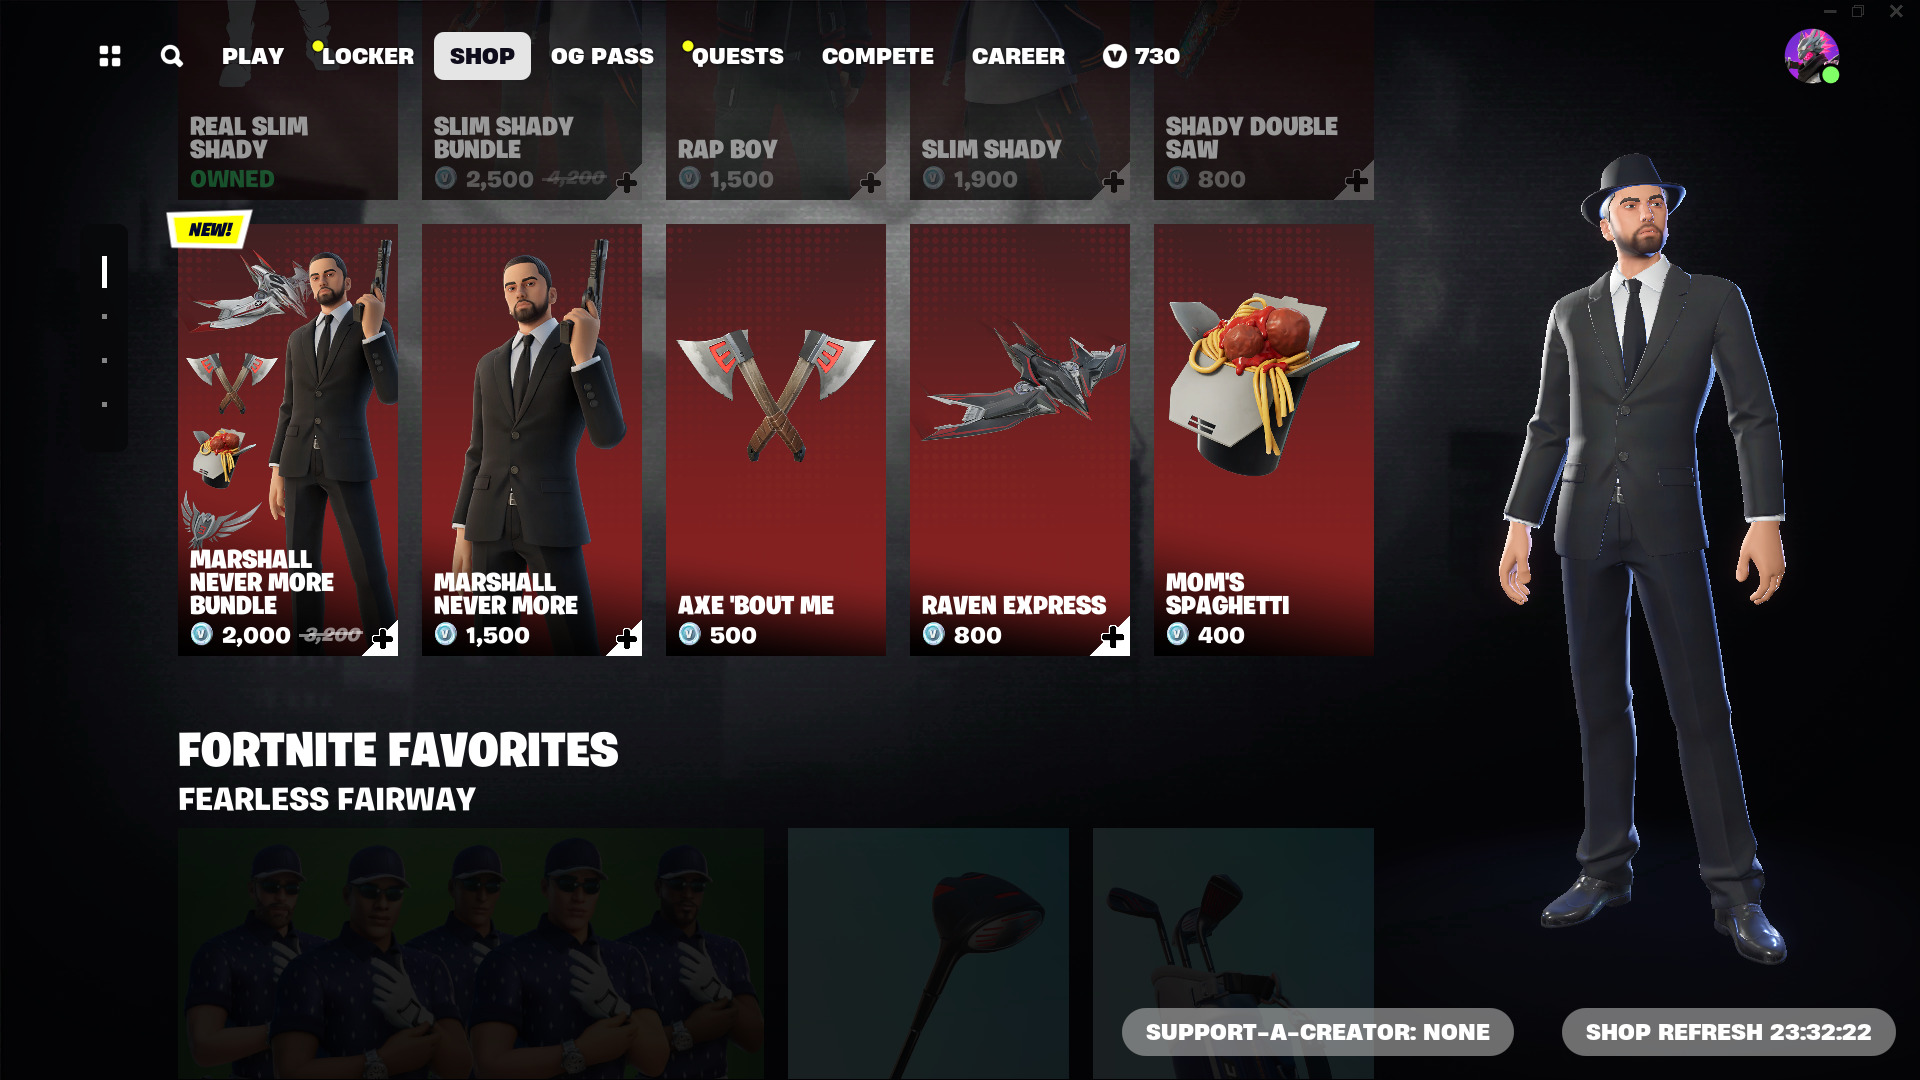 Eminem Fortnite skin: Release date and what's included